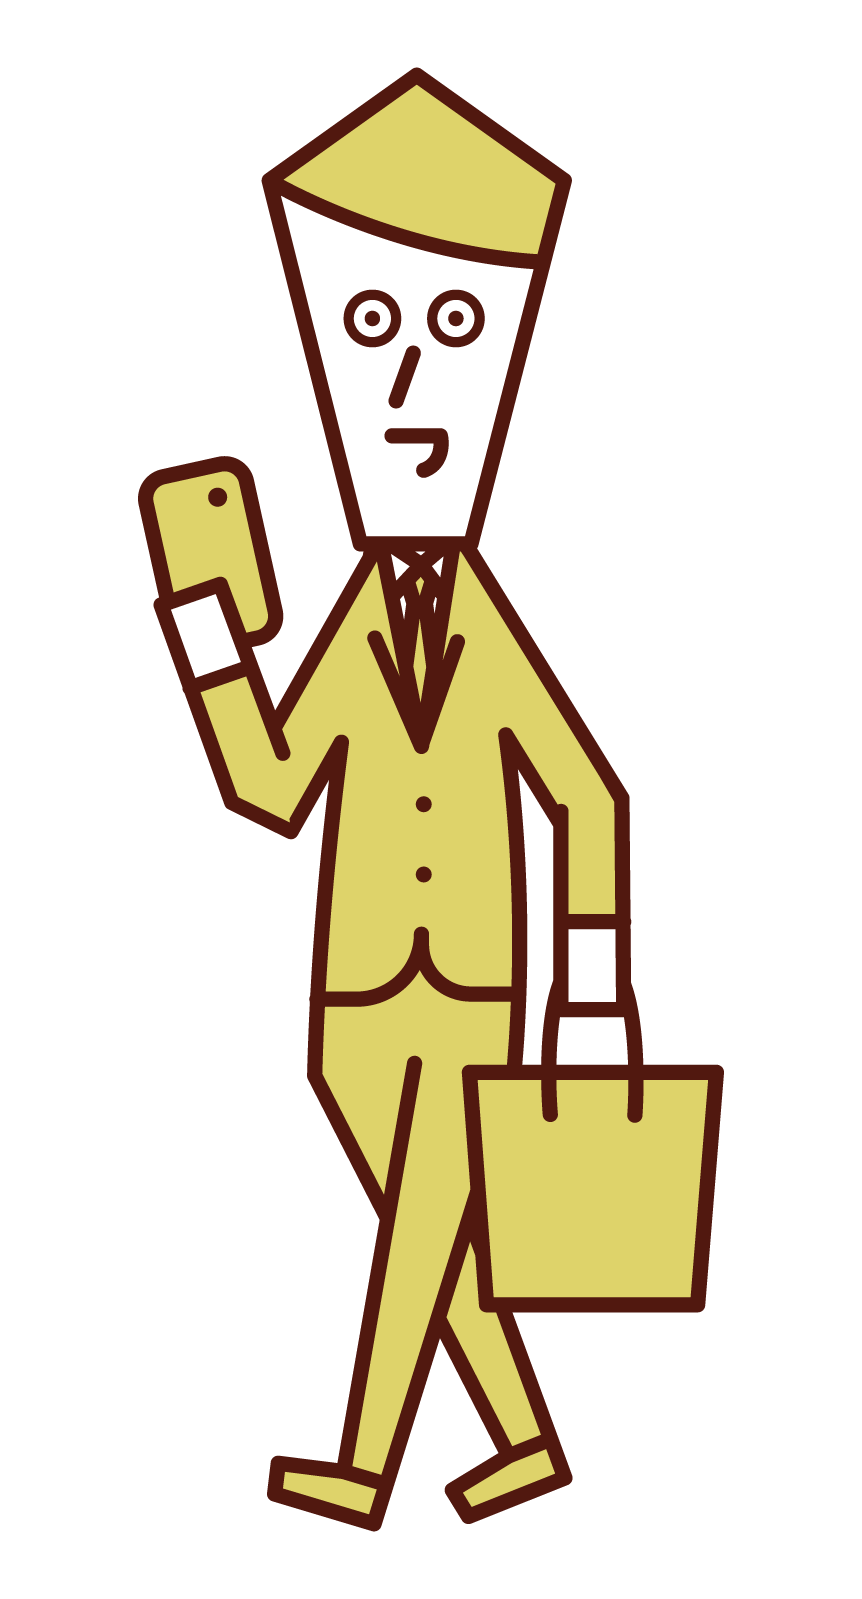 Illustration of a man using a smartphone while walking